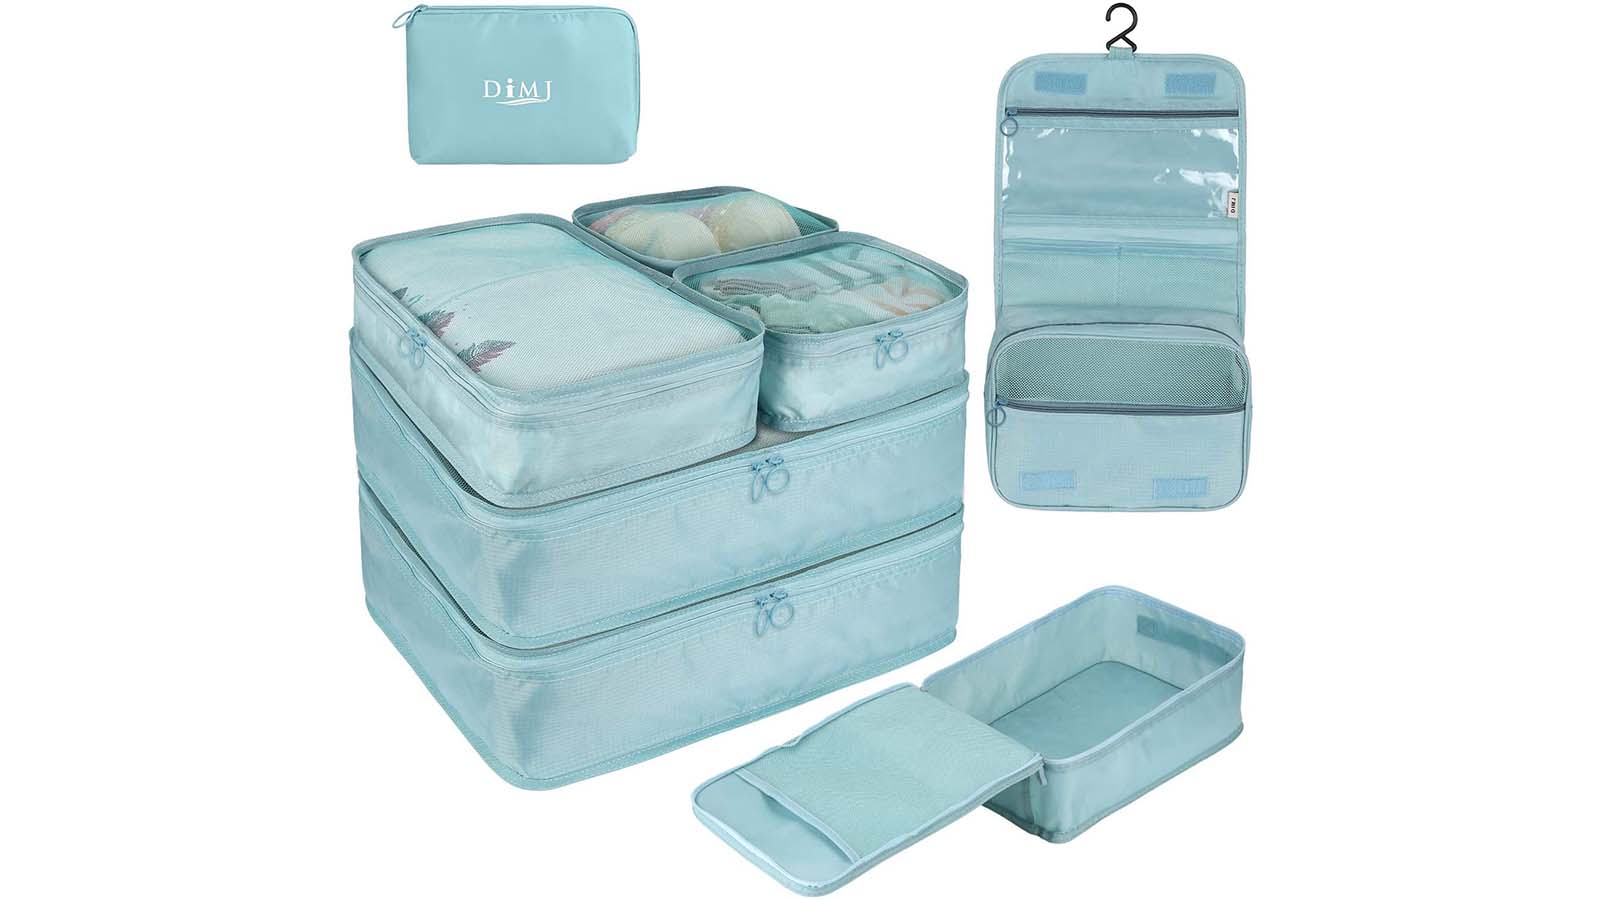 Packing Cubes for Travel Pouches Luggage Organiser Clothes